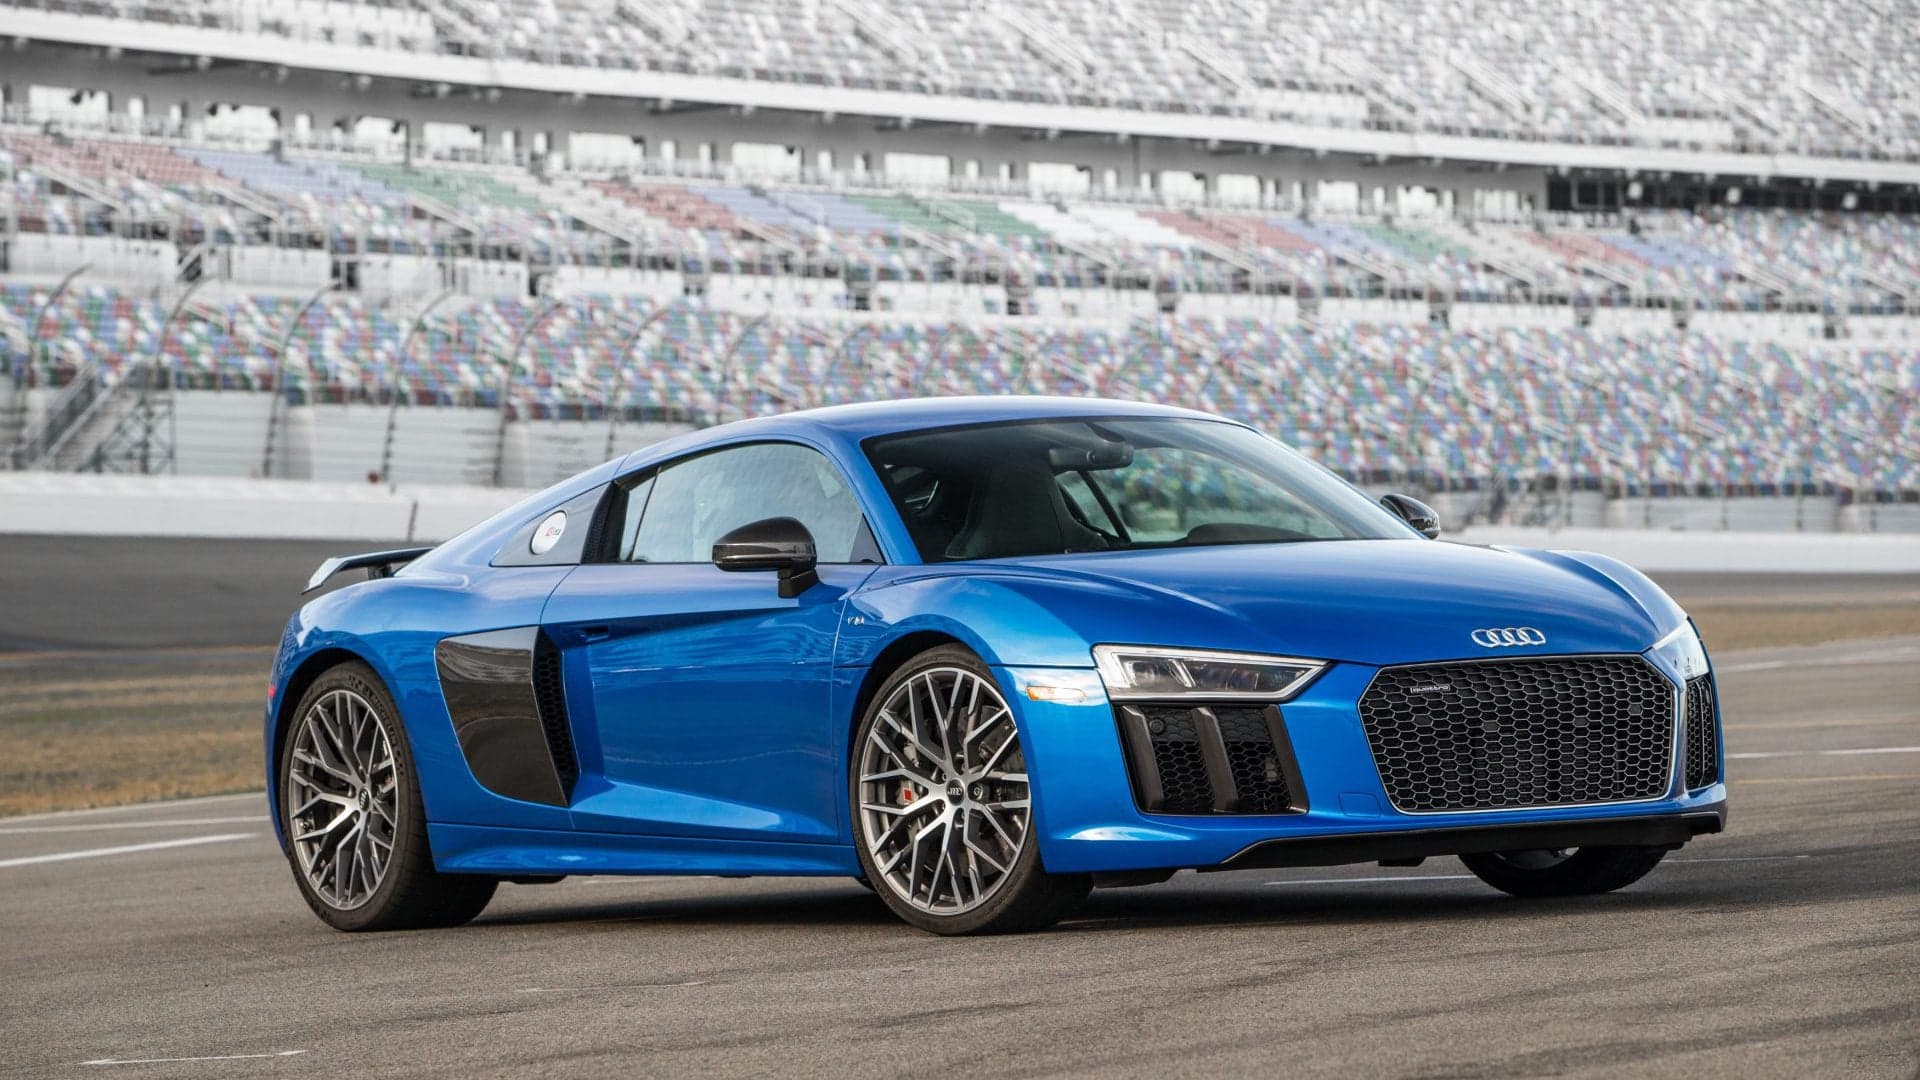 Audi Has No Plans for a Third-Generation R8, Report Says